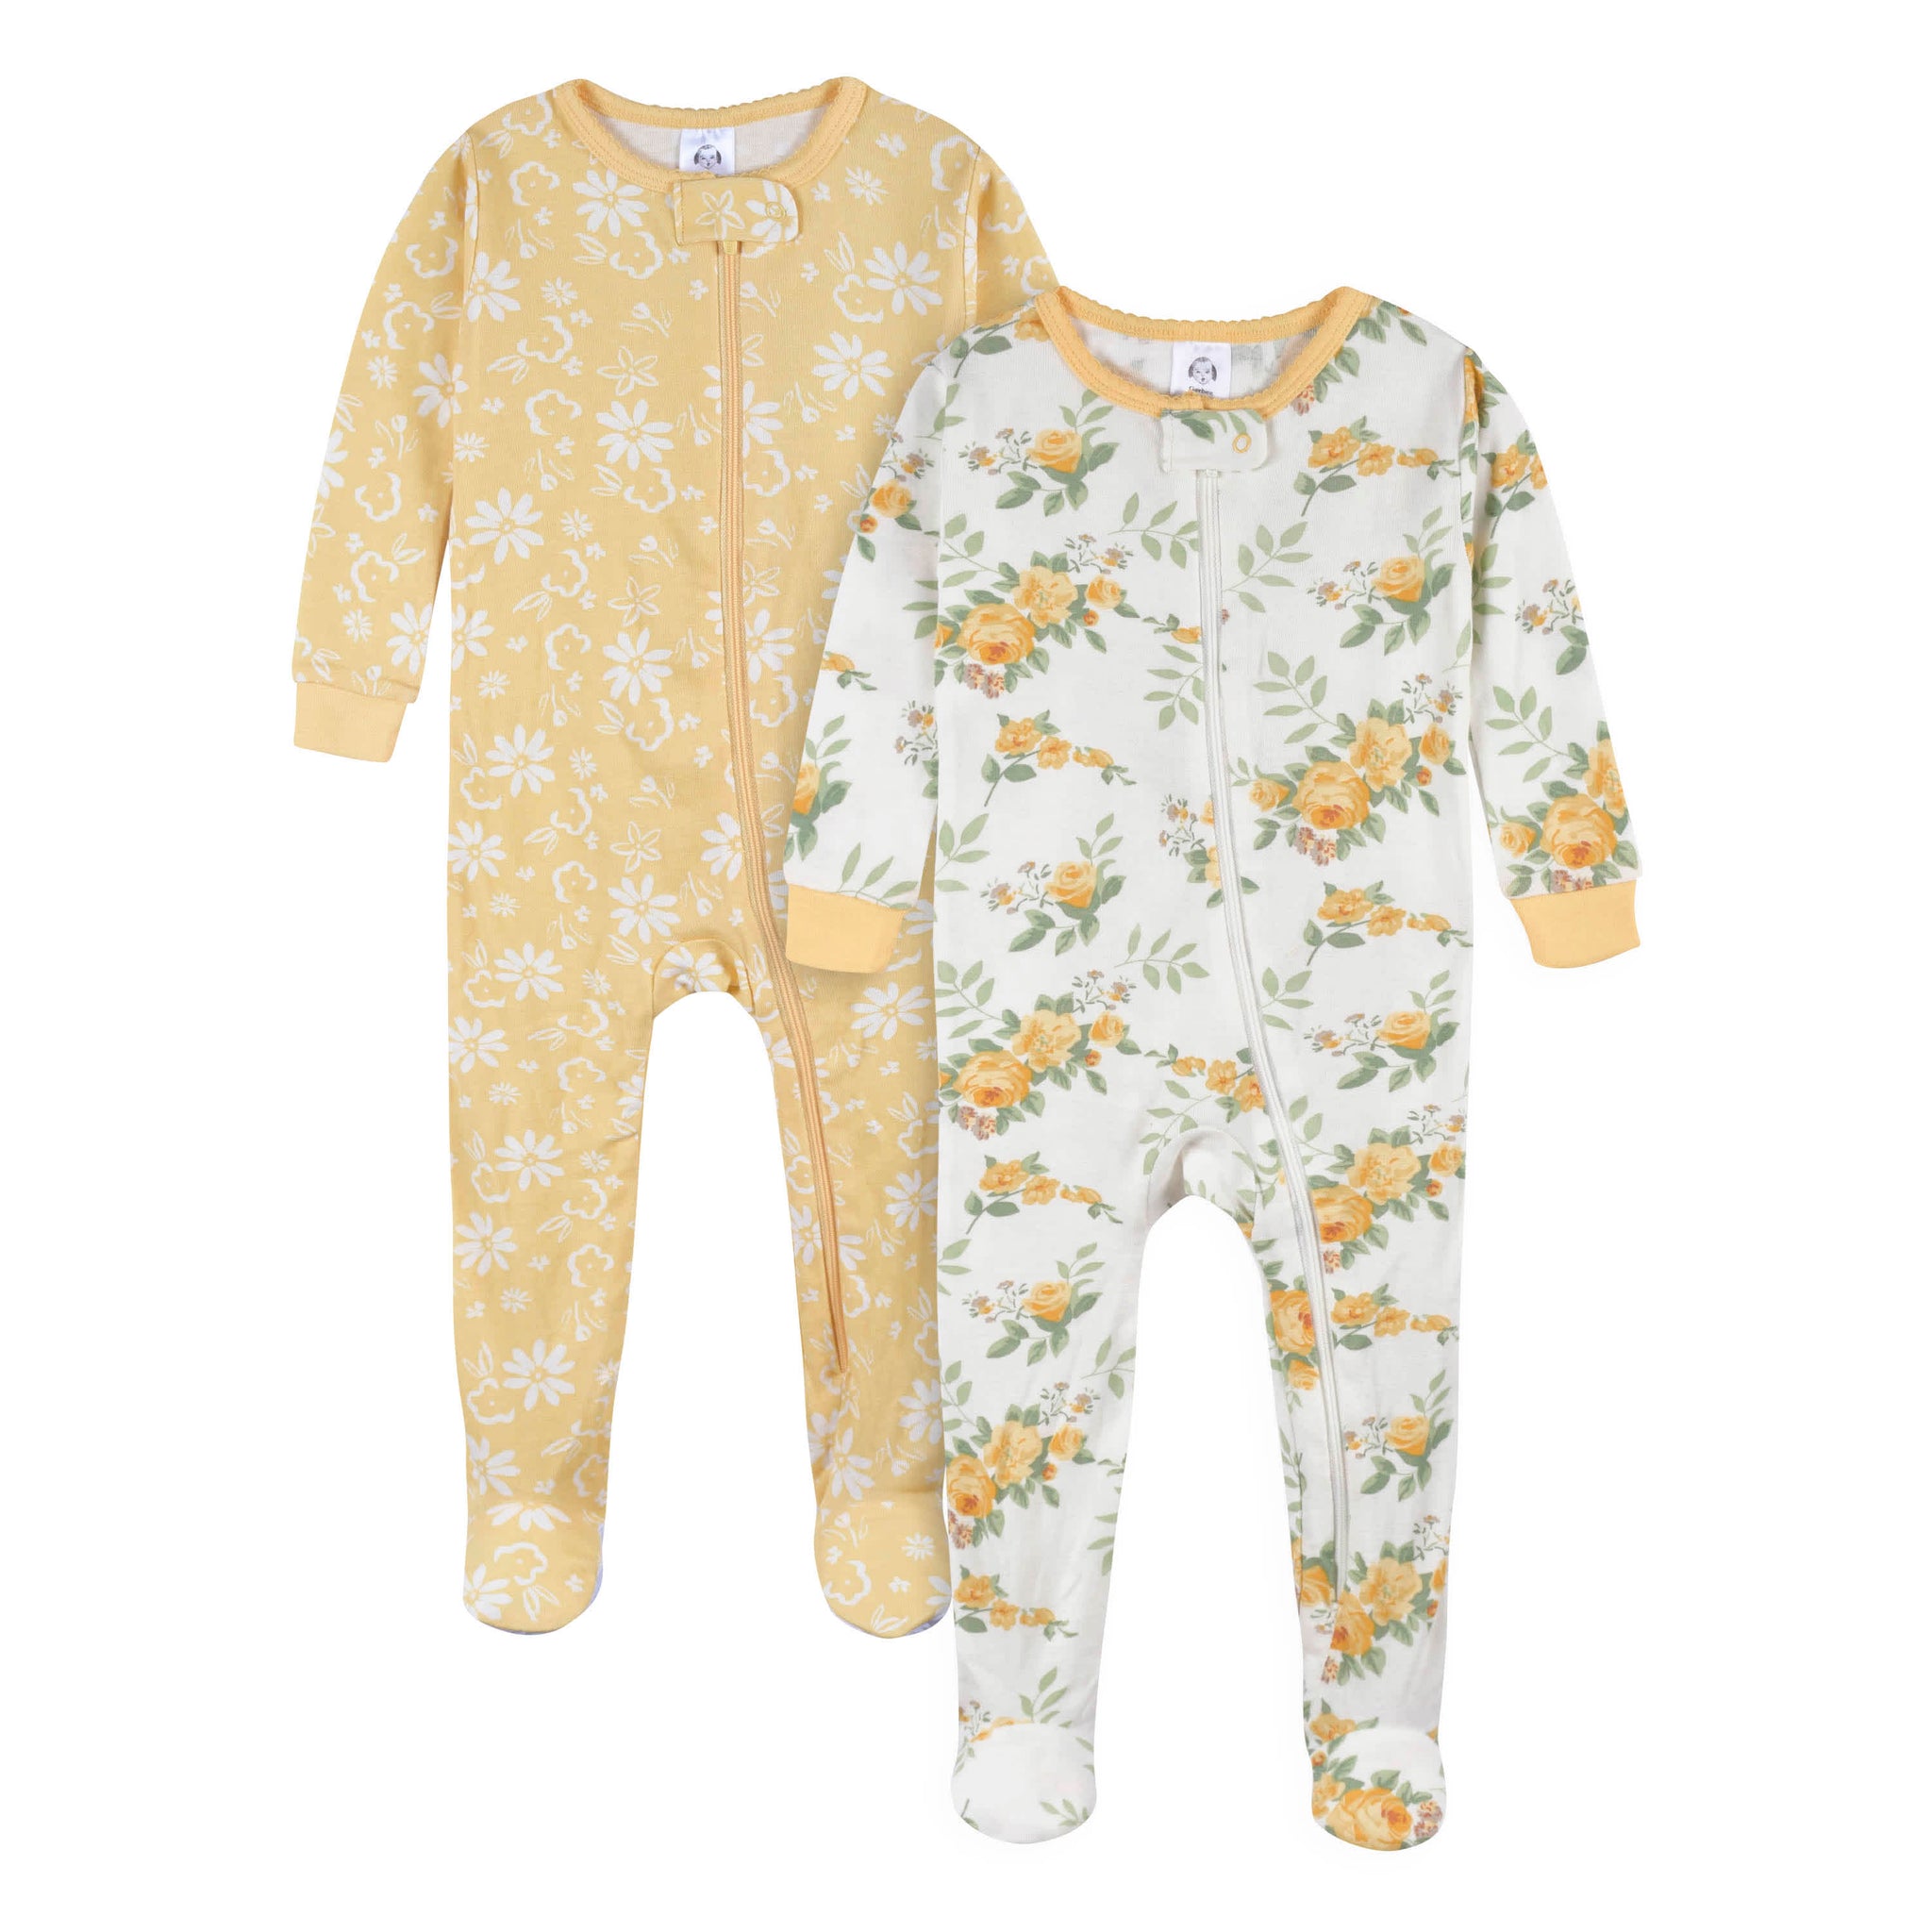 2-Pack Baby & Toddler Girls Golden Flowers Snug Fit Footed Cotton Pajamas-Gerber Childrenswear Wholesale